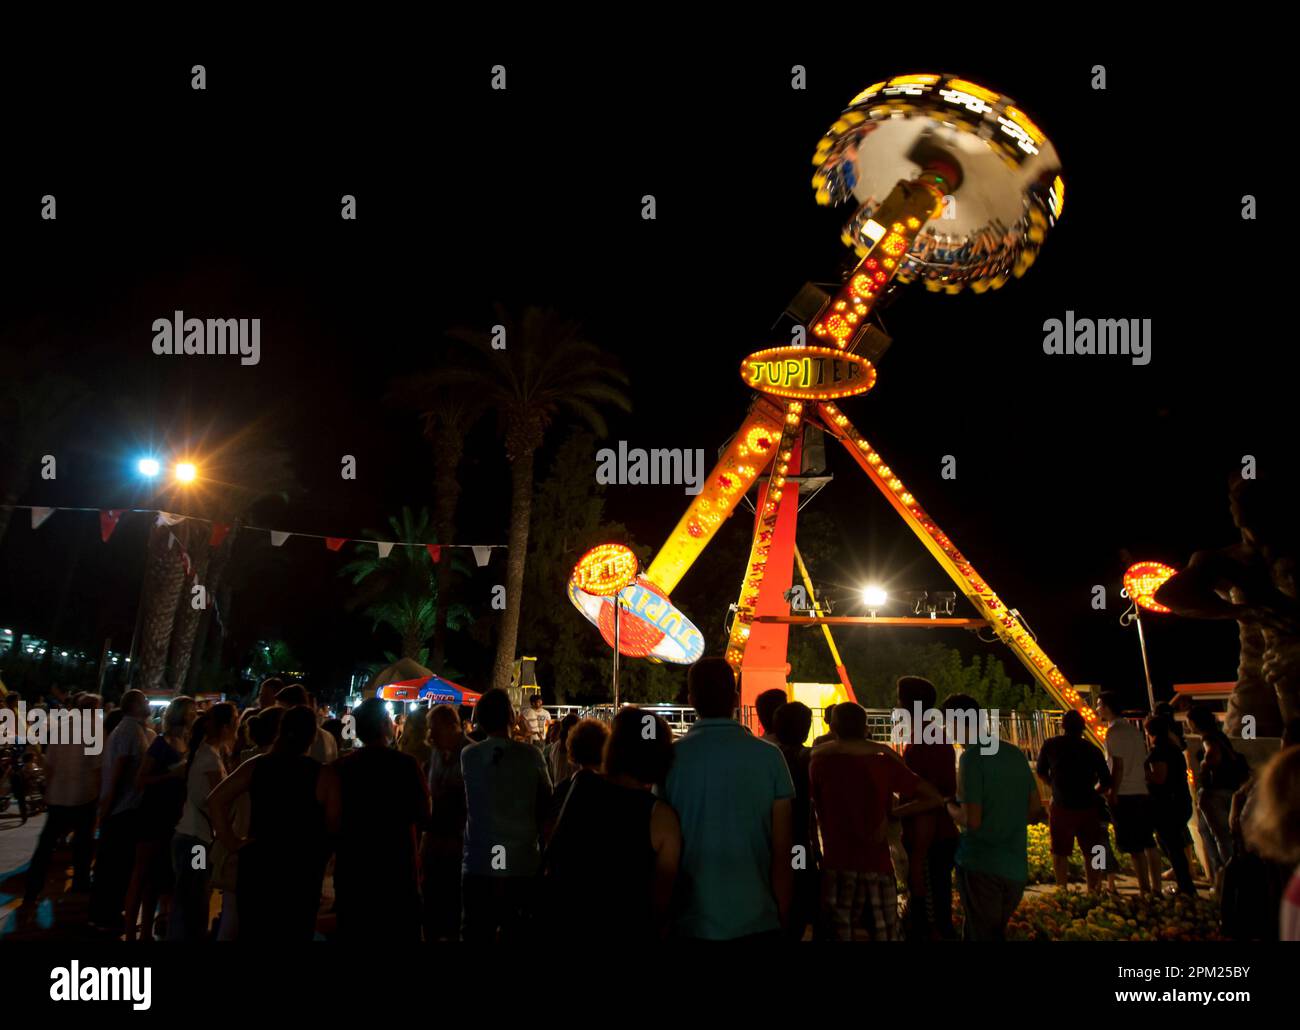 A crowd of people watch thrill seekers spin in mid air on the Jupiter ride at the amusement park set up at Antalya in Turkiye. Stock Photo